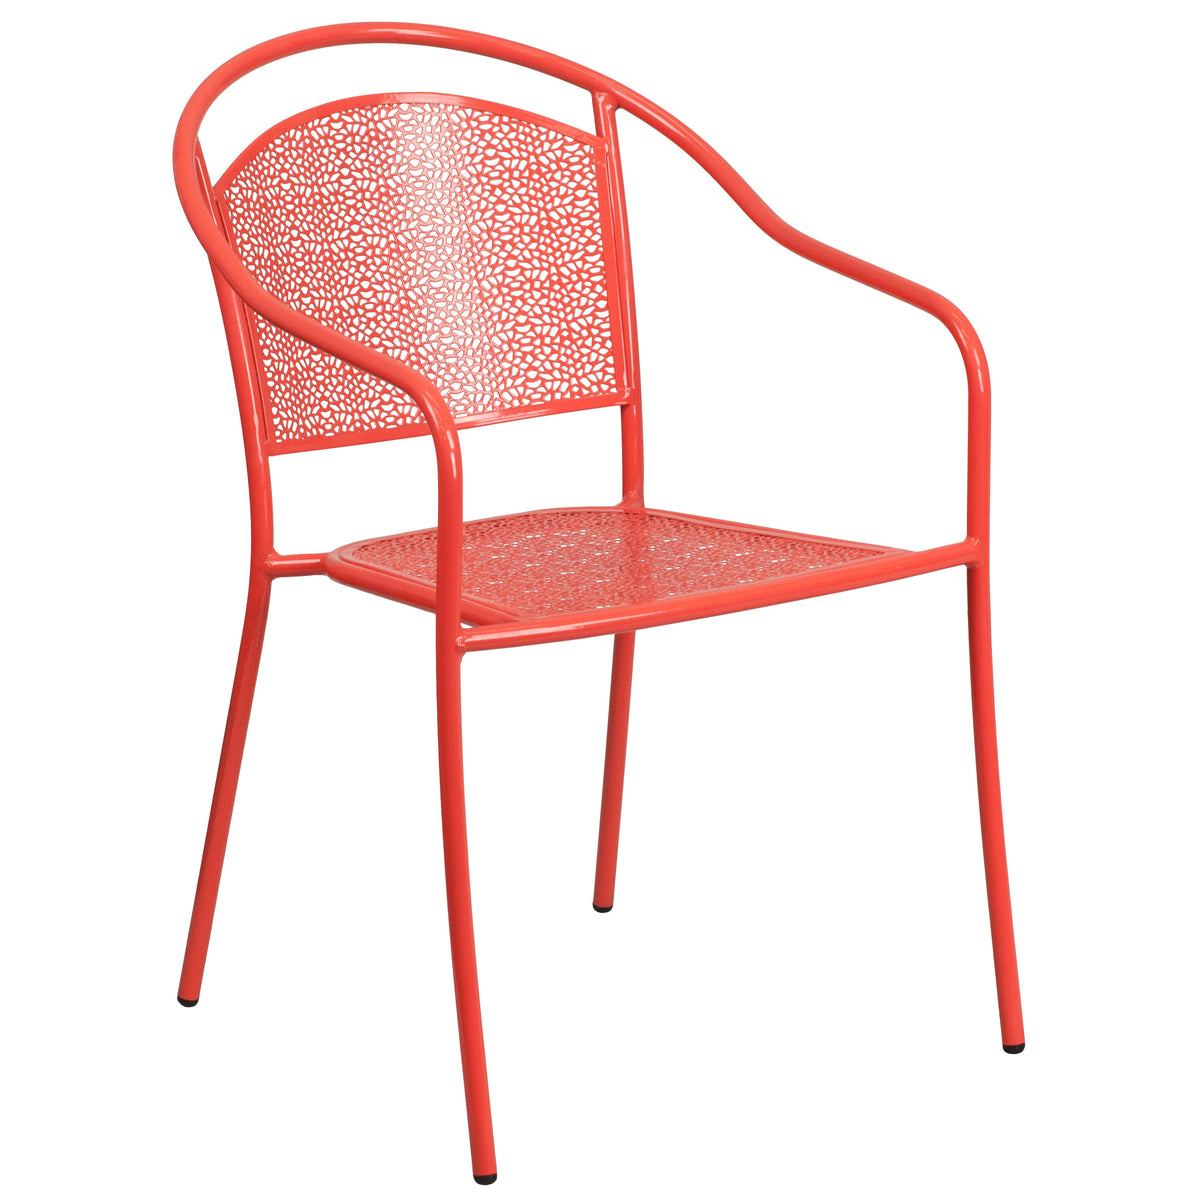 Coral |#| 35.25inch Round Coral Indoor-Outdoor Steel Patio Table Set with 4 Round Back Chairs